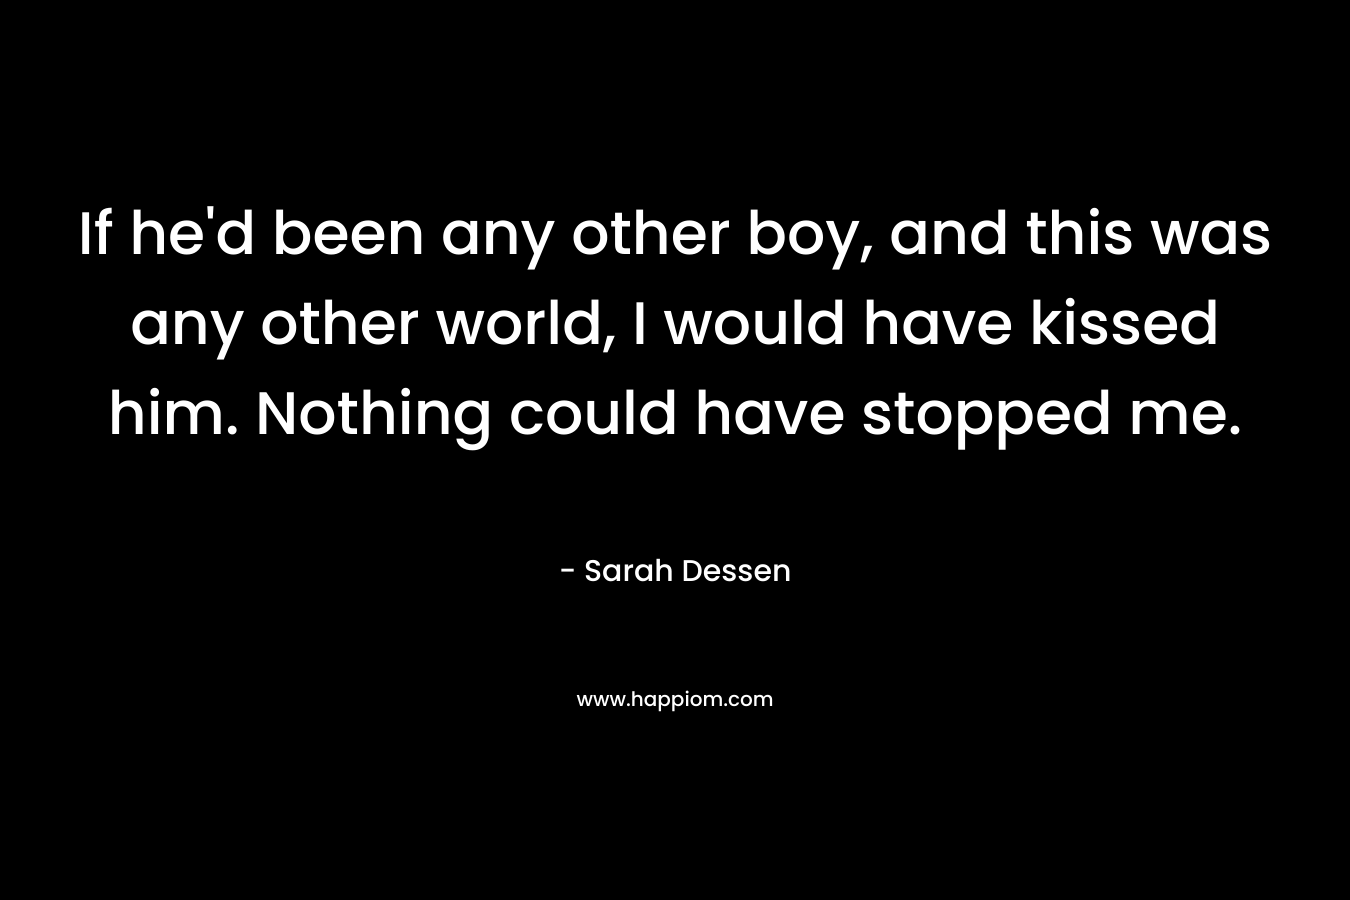 If he’d been any other boy, and this was any other world, I would have kissed him. Nothing could have stopped me. – Sarah Dessen